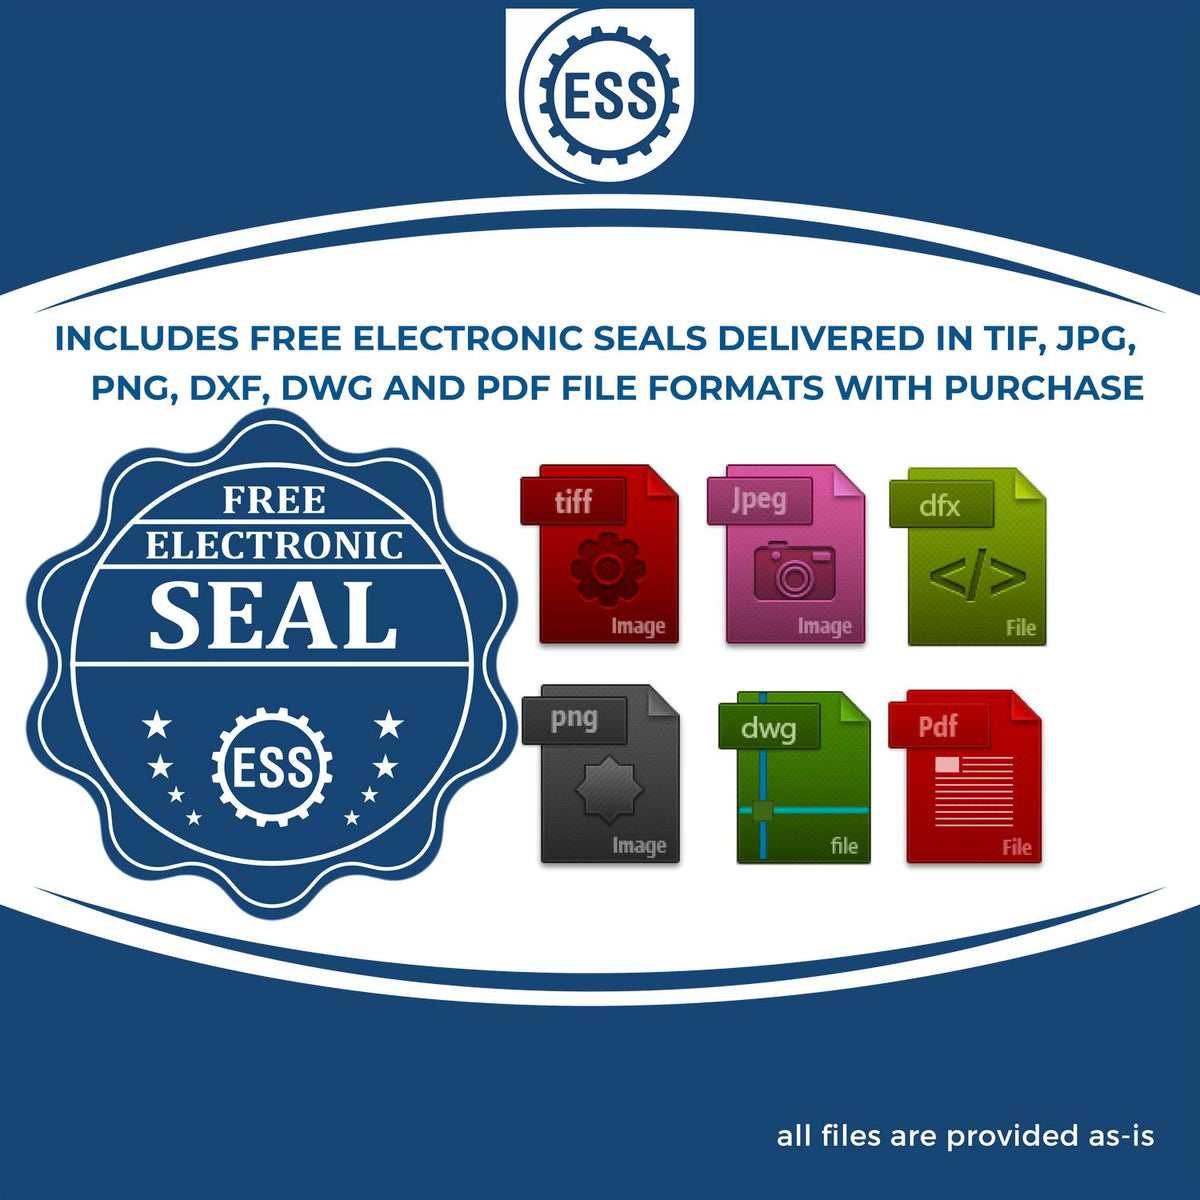 An infographic for the free electronic seal for the South Carolina Geologist Desk Seal illustrating the different file type icons such as DXF, DWG, TIF, JPG and PNG.